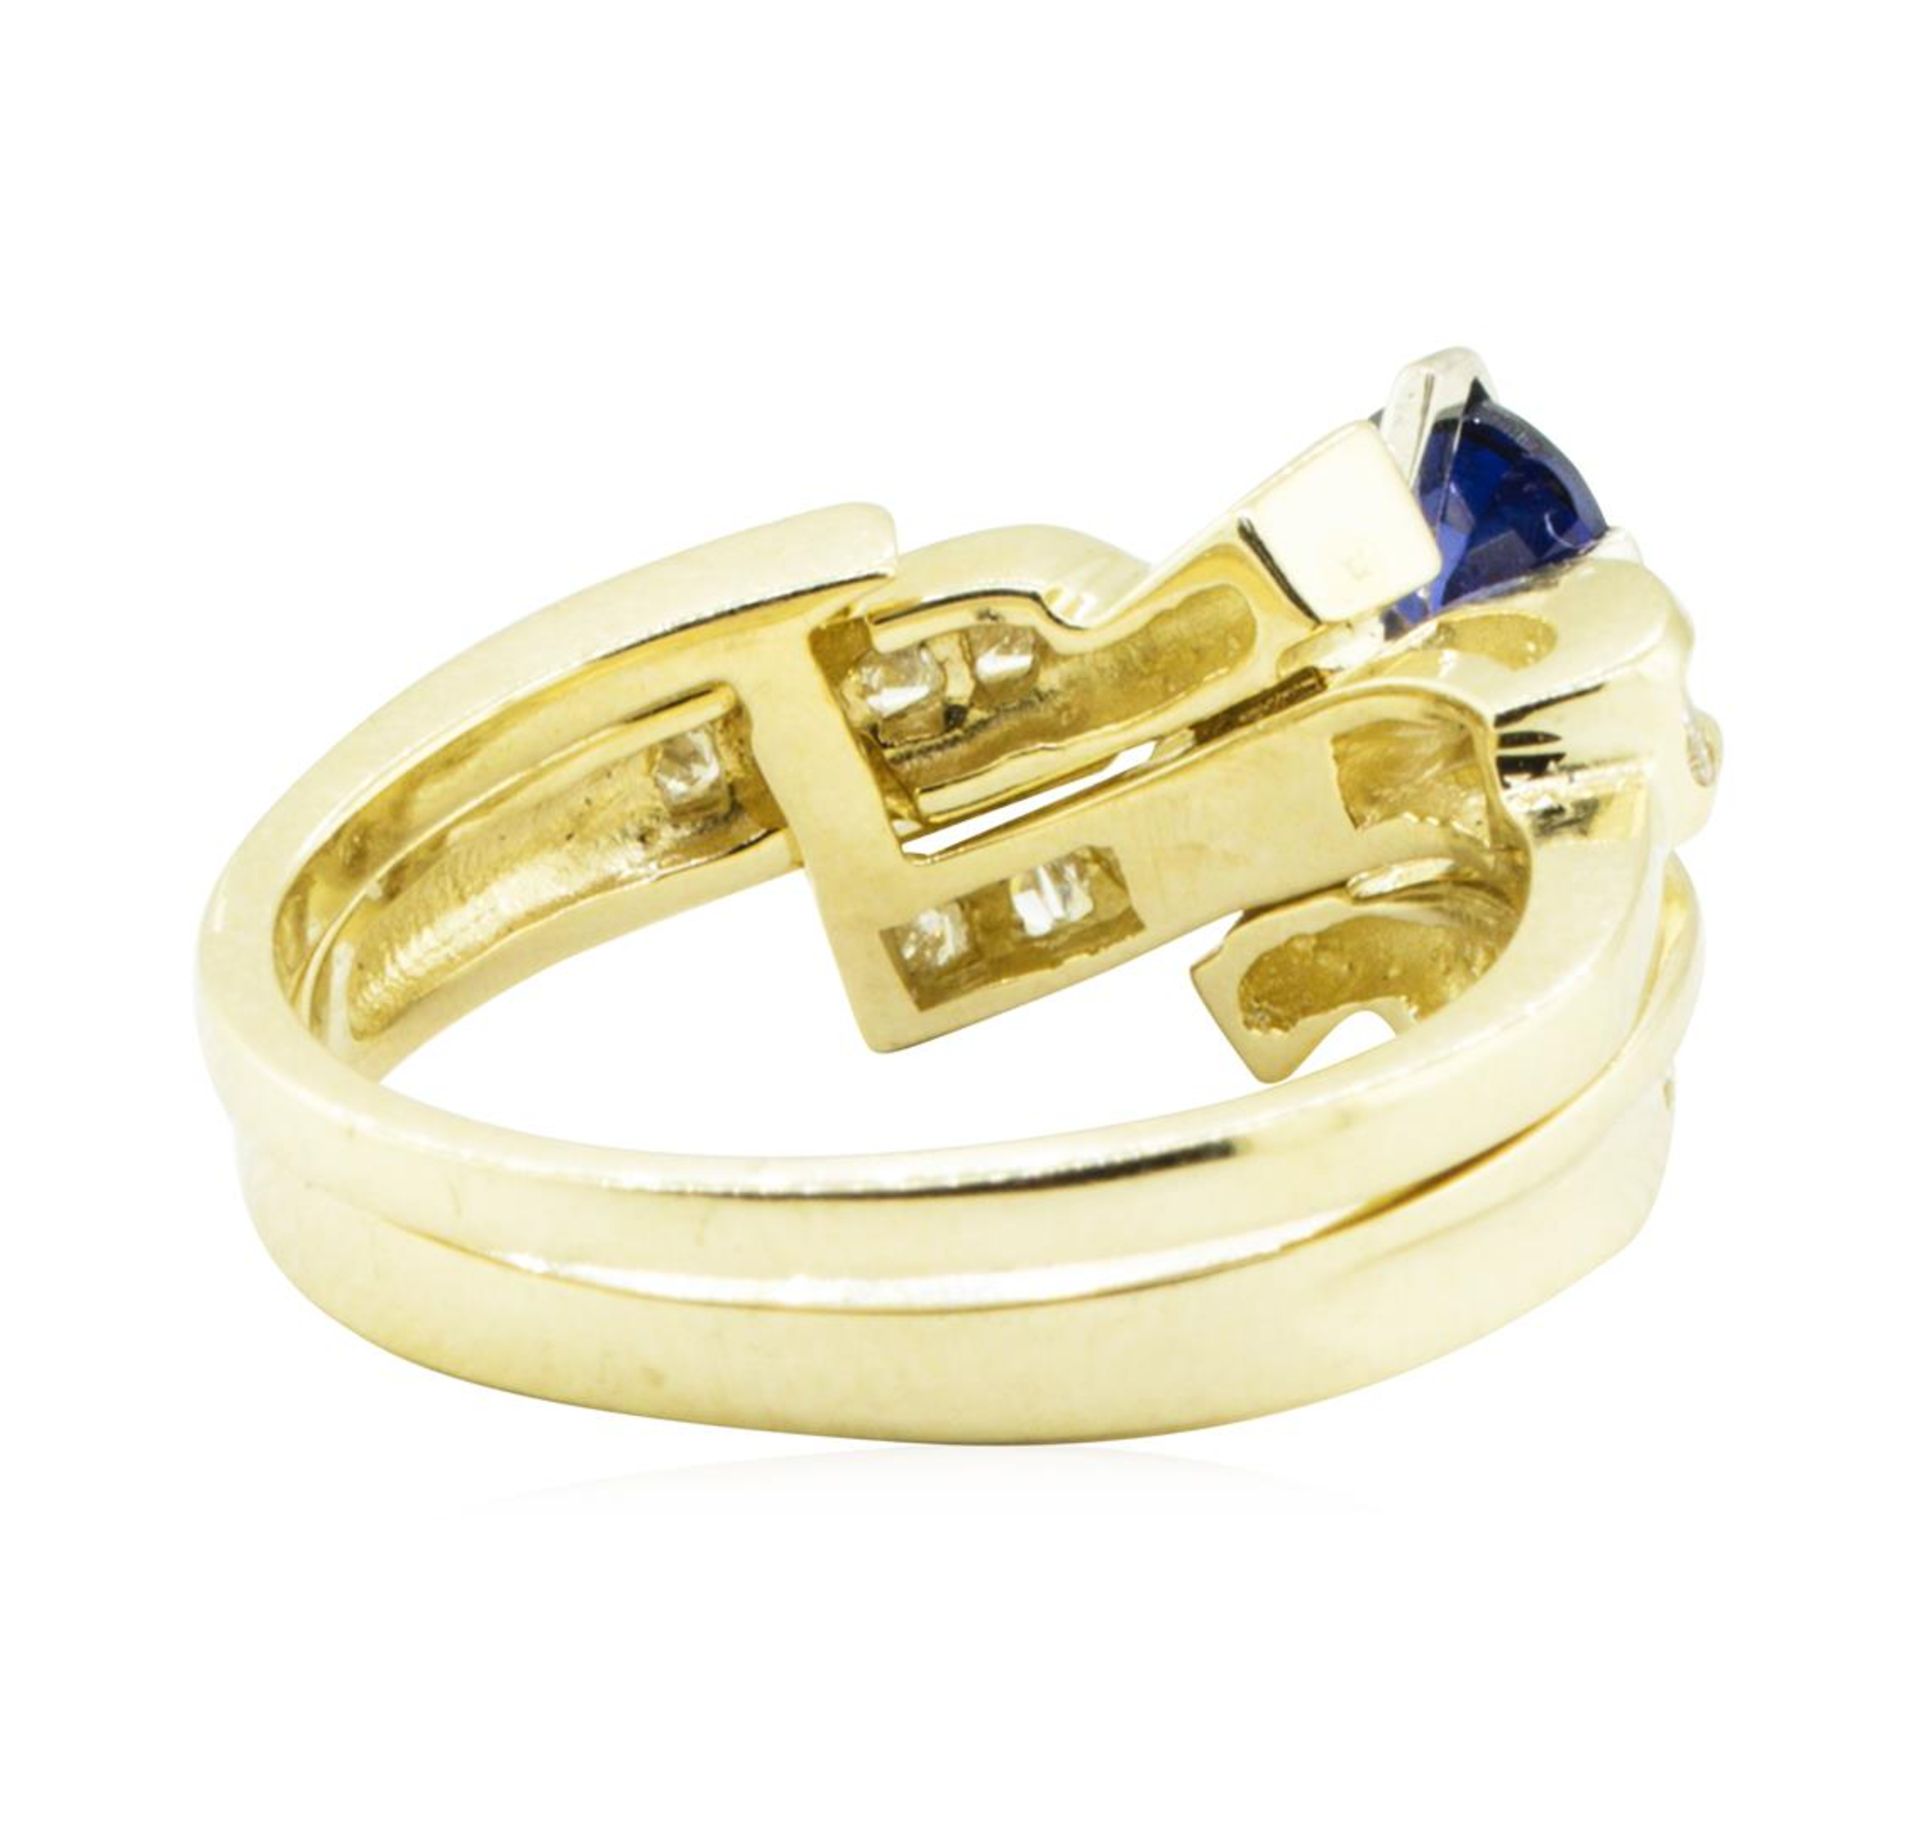 1.50 ctw Blue Sapphire and Diamond Ring Set - 14KT Yellow Gold - Image 3 of 4